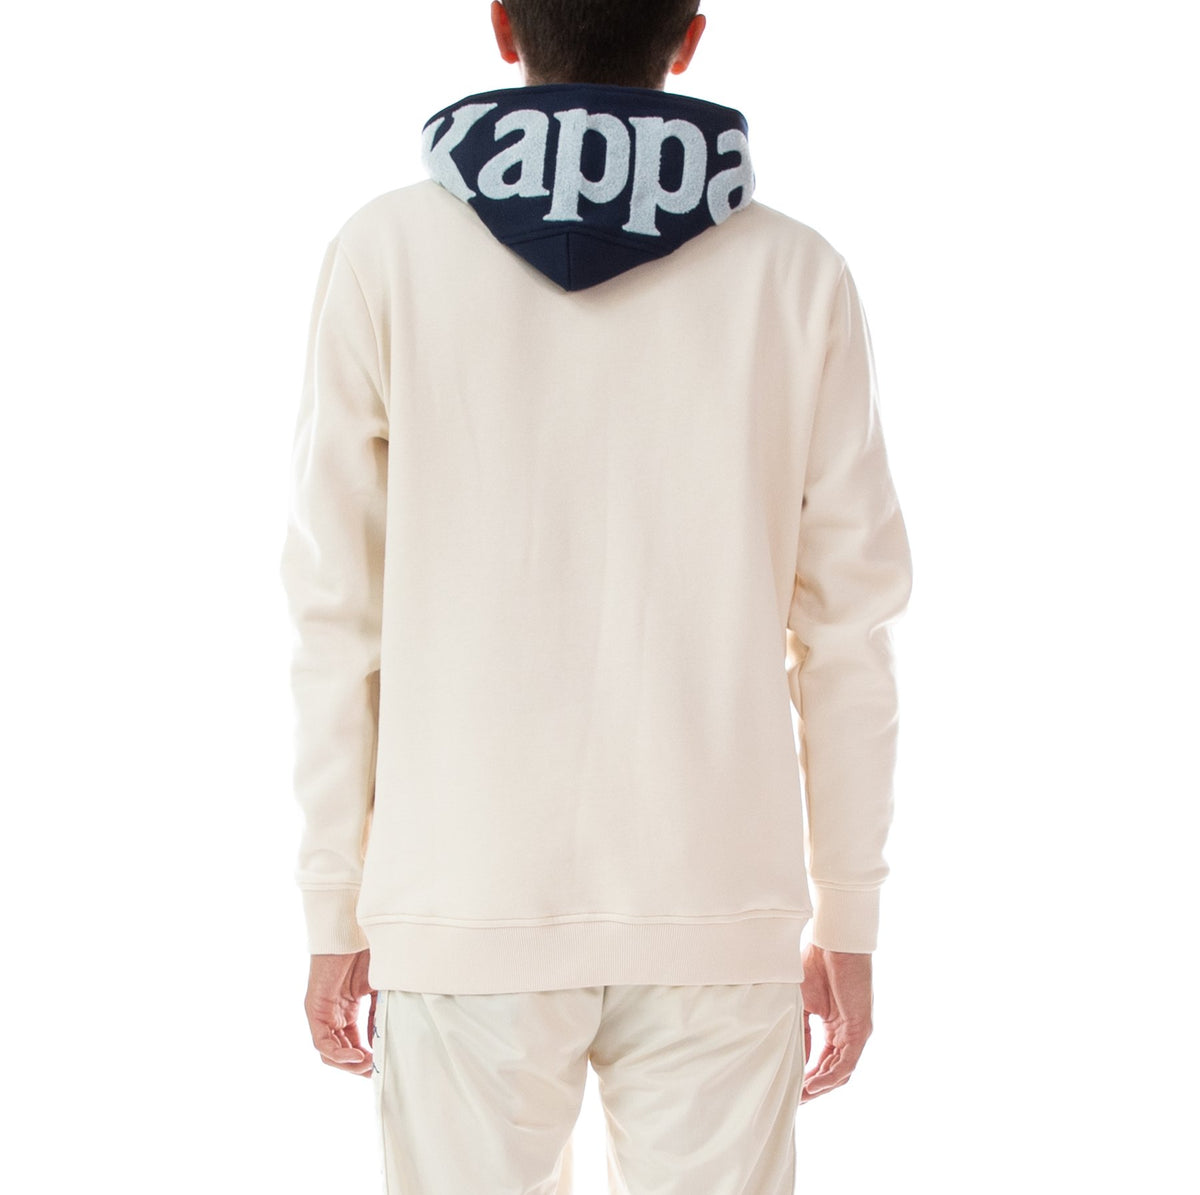 KAPPA-AUTHENTIC DAVE Egg Shell HOODIE 33116CW